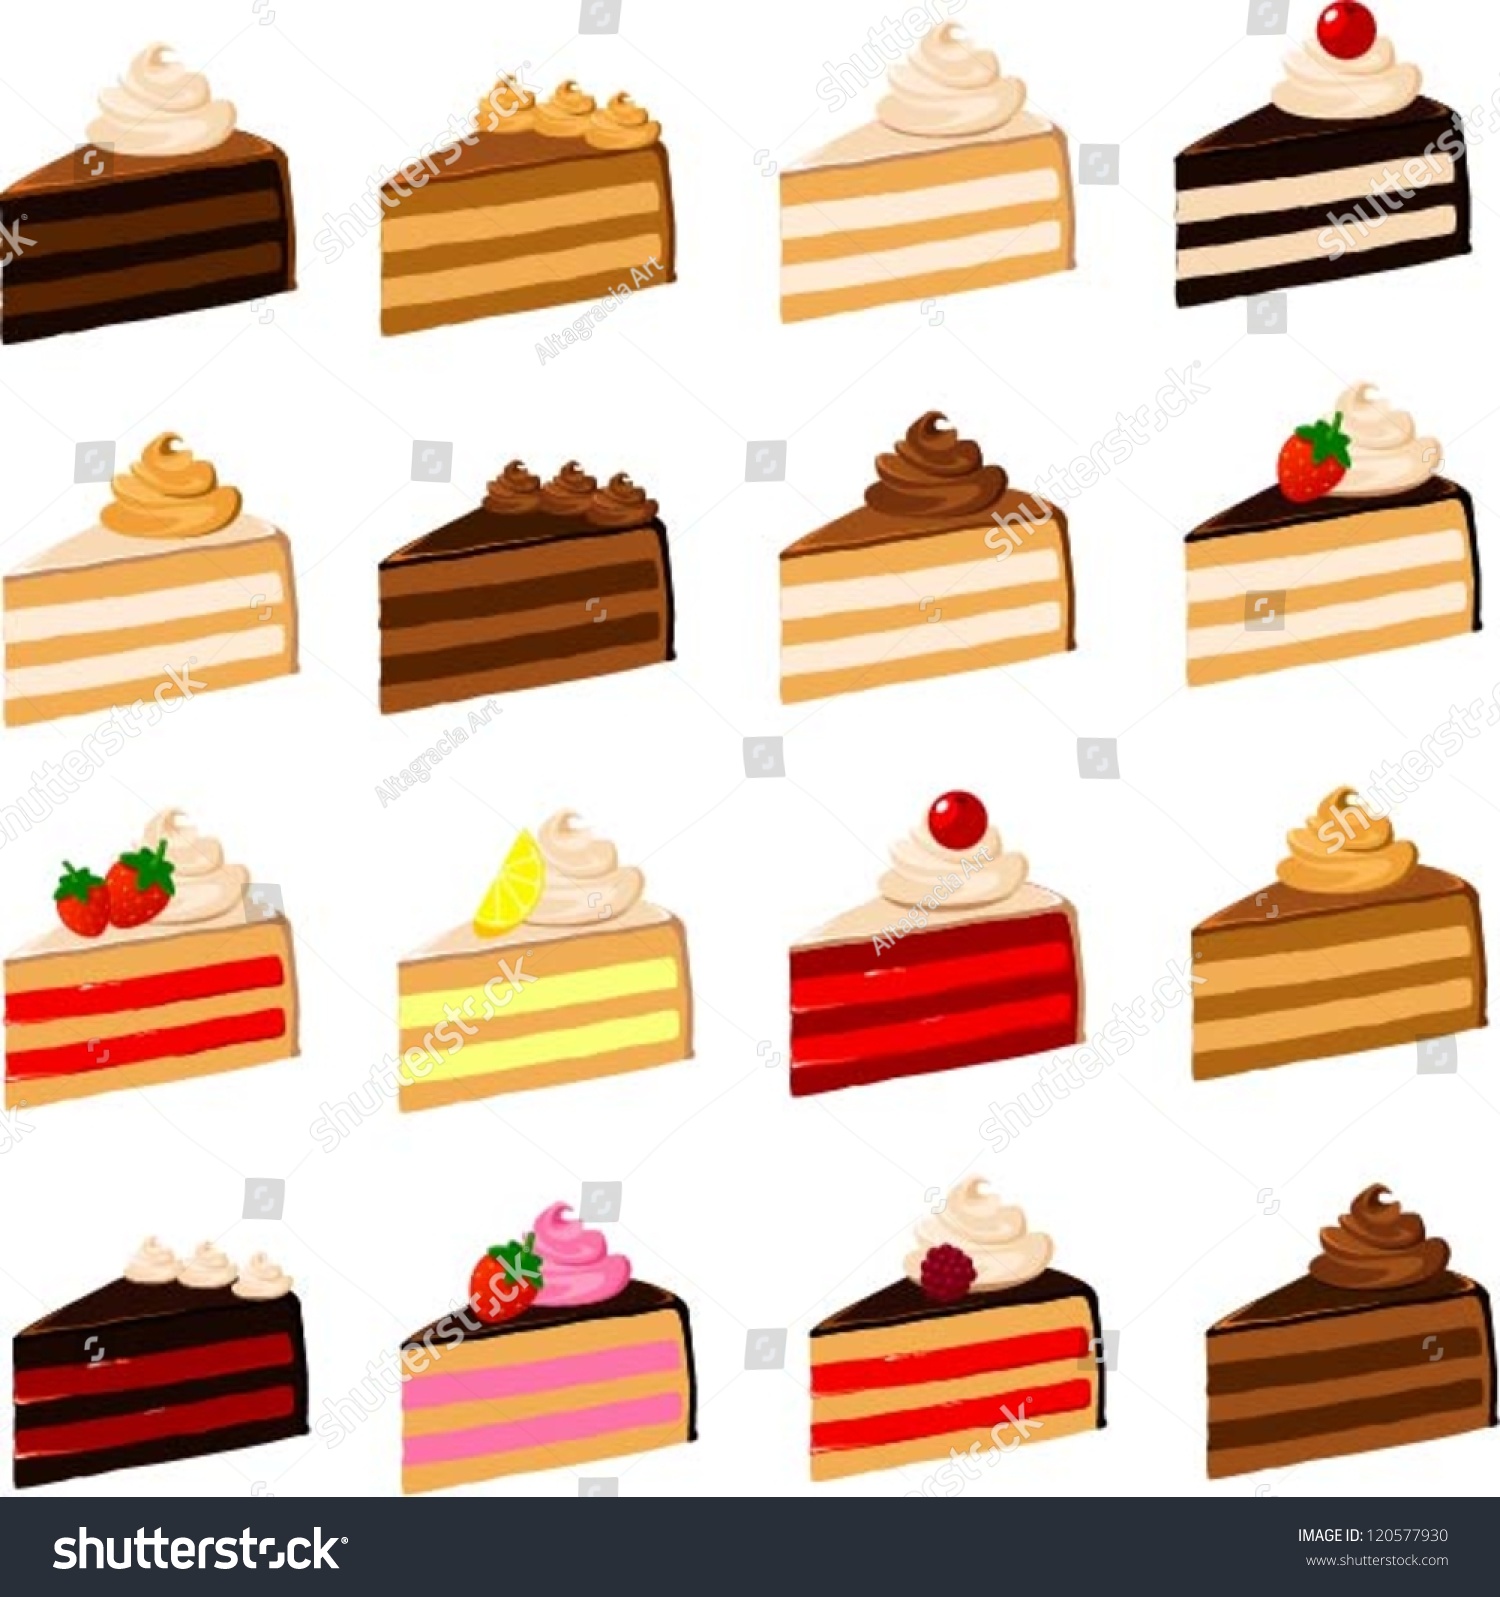 SVG of Vector illustration of various slices of cake. svg